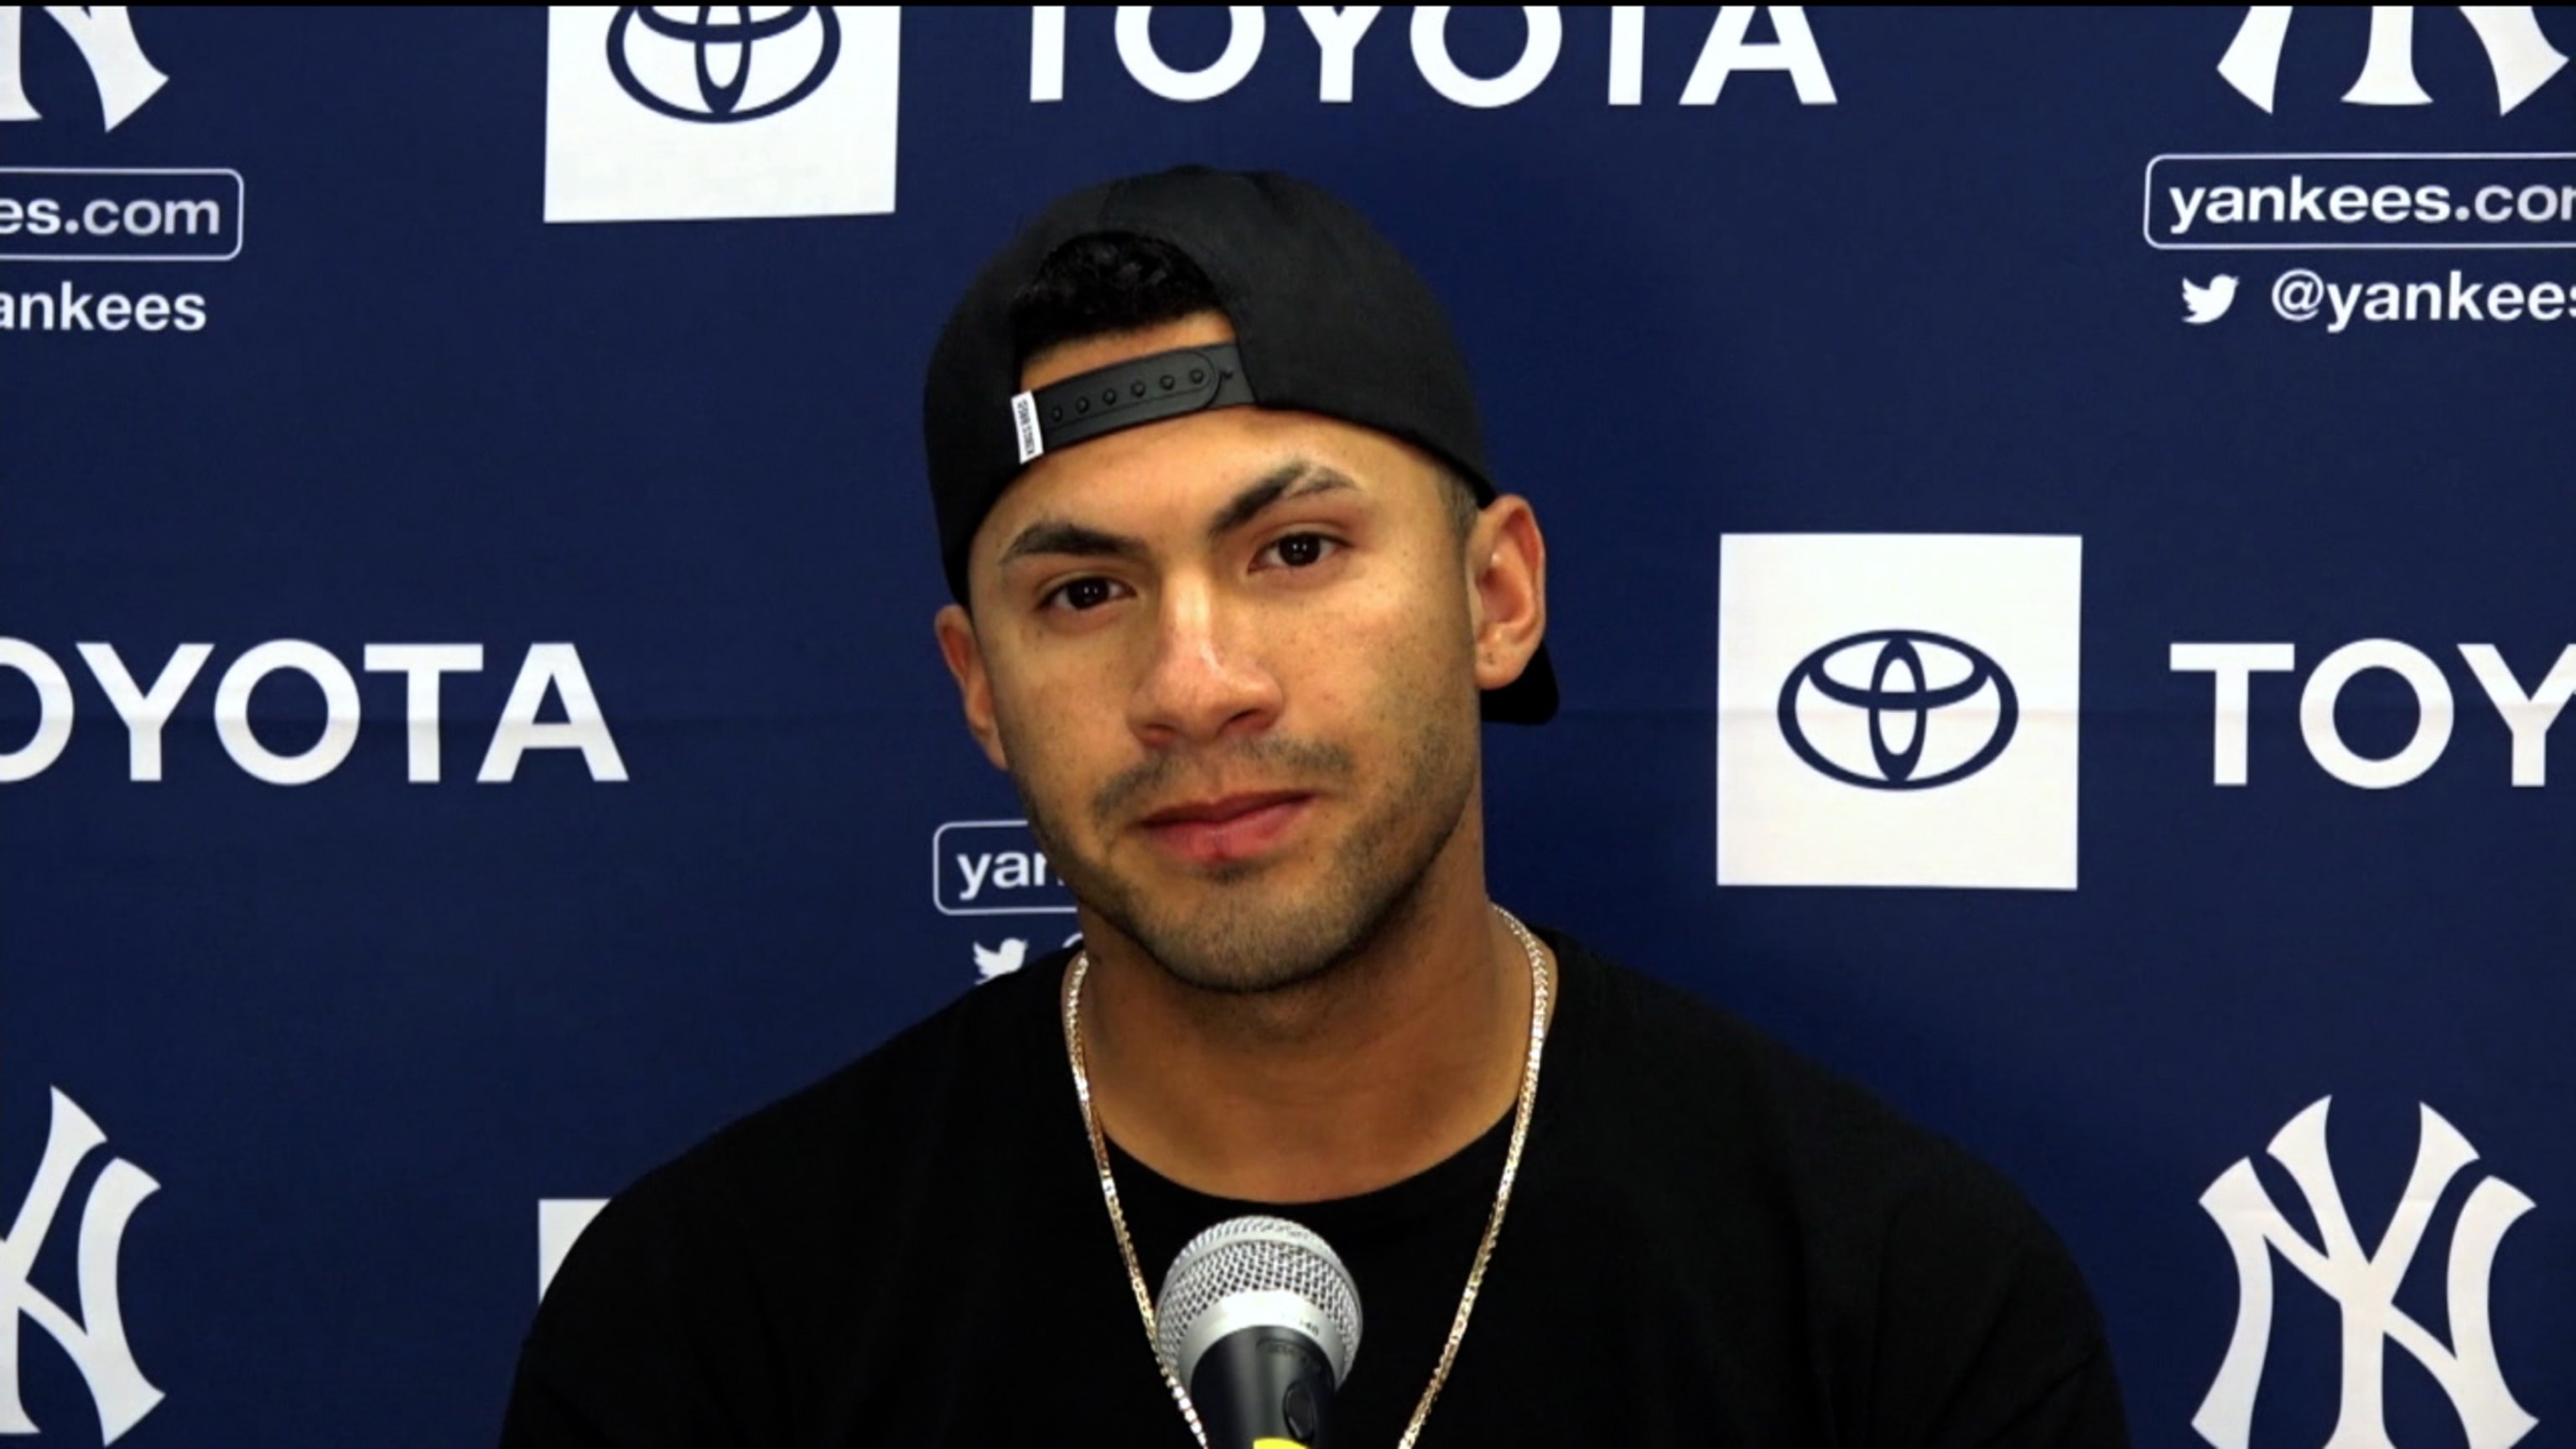 Gleyber Torres looking to bounce back in 2021